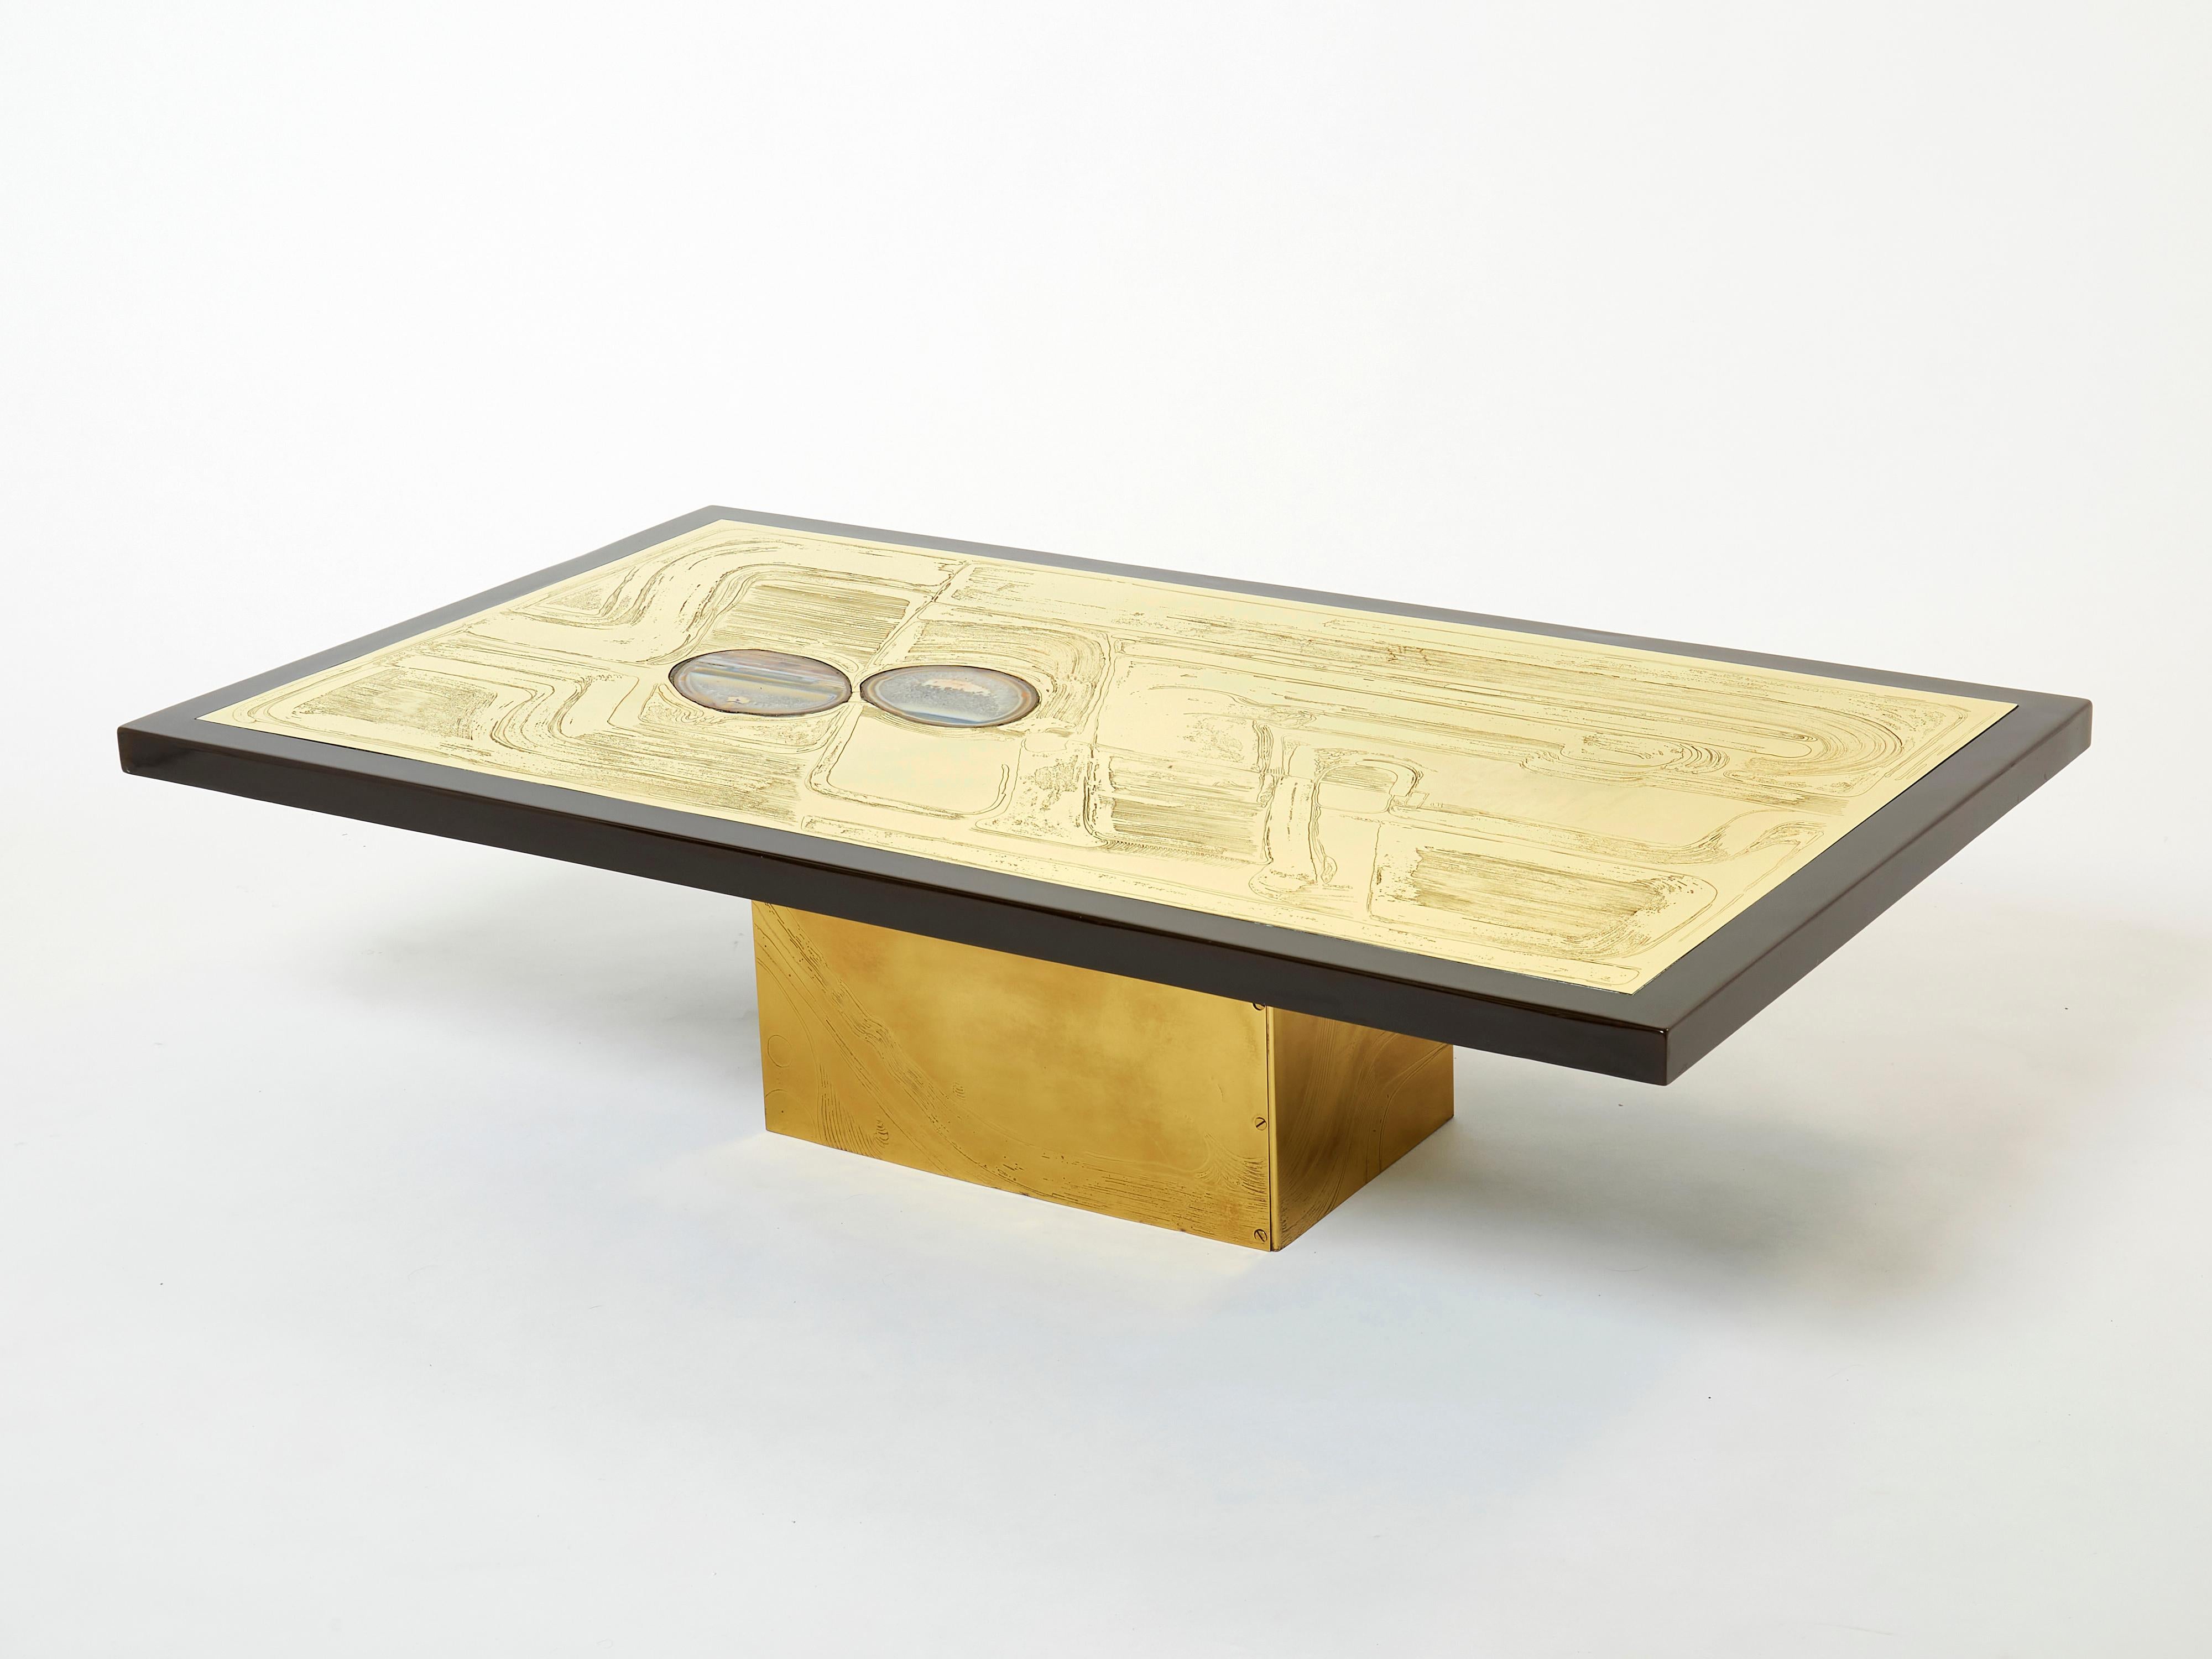 Late 20th Century Christian Krekels Signed Belgian Etched Brass Agate Coffee Table, 1979 For Sale